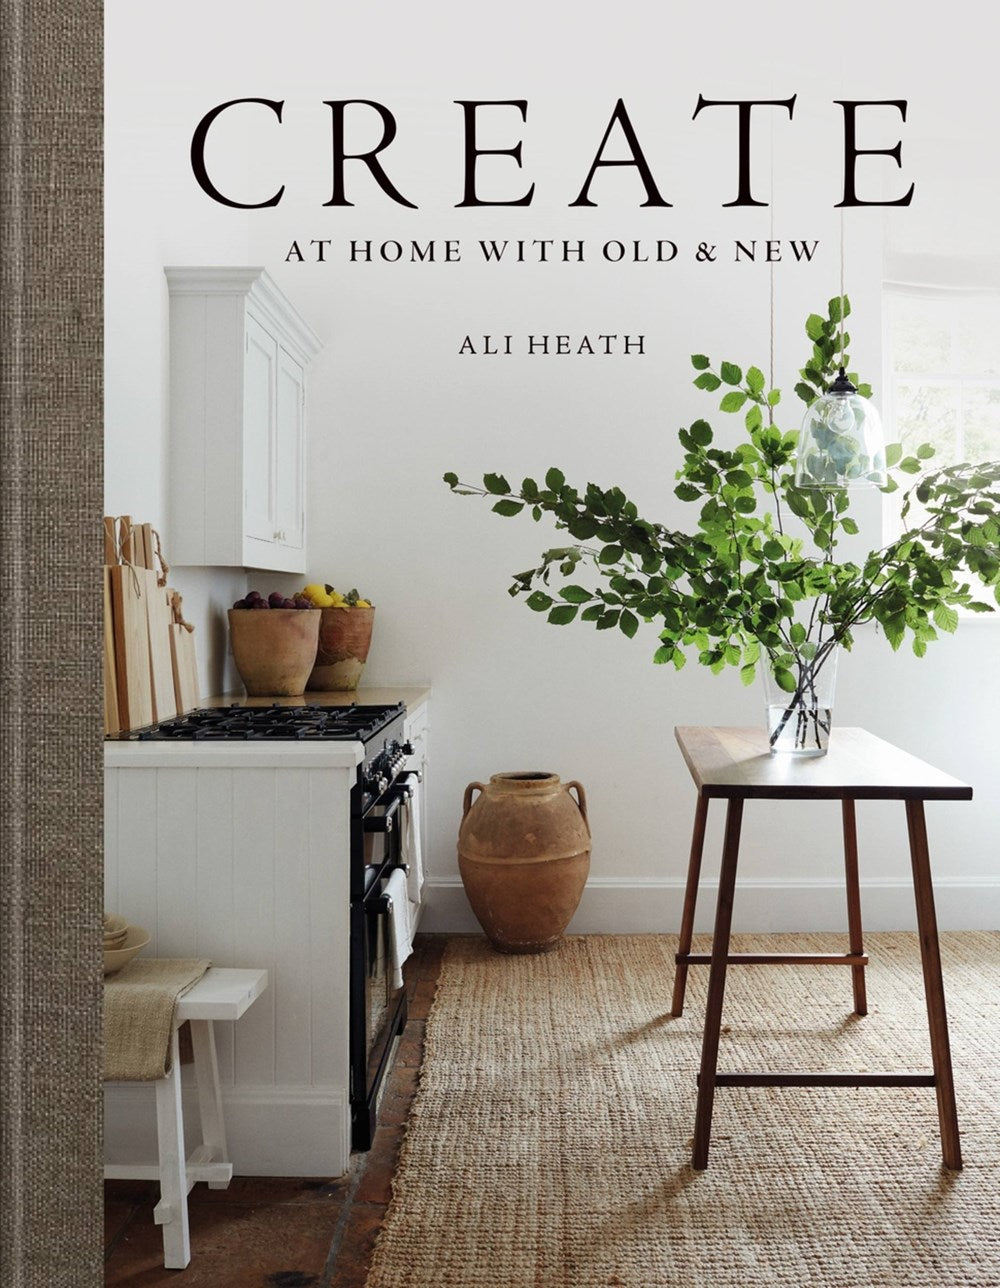 Create - At Home With Old & New